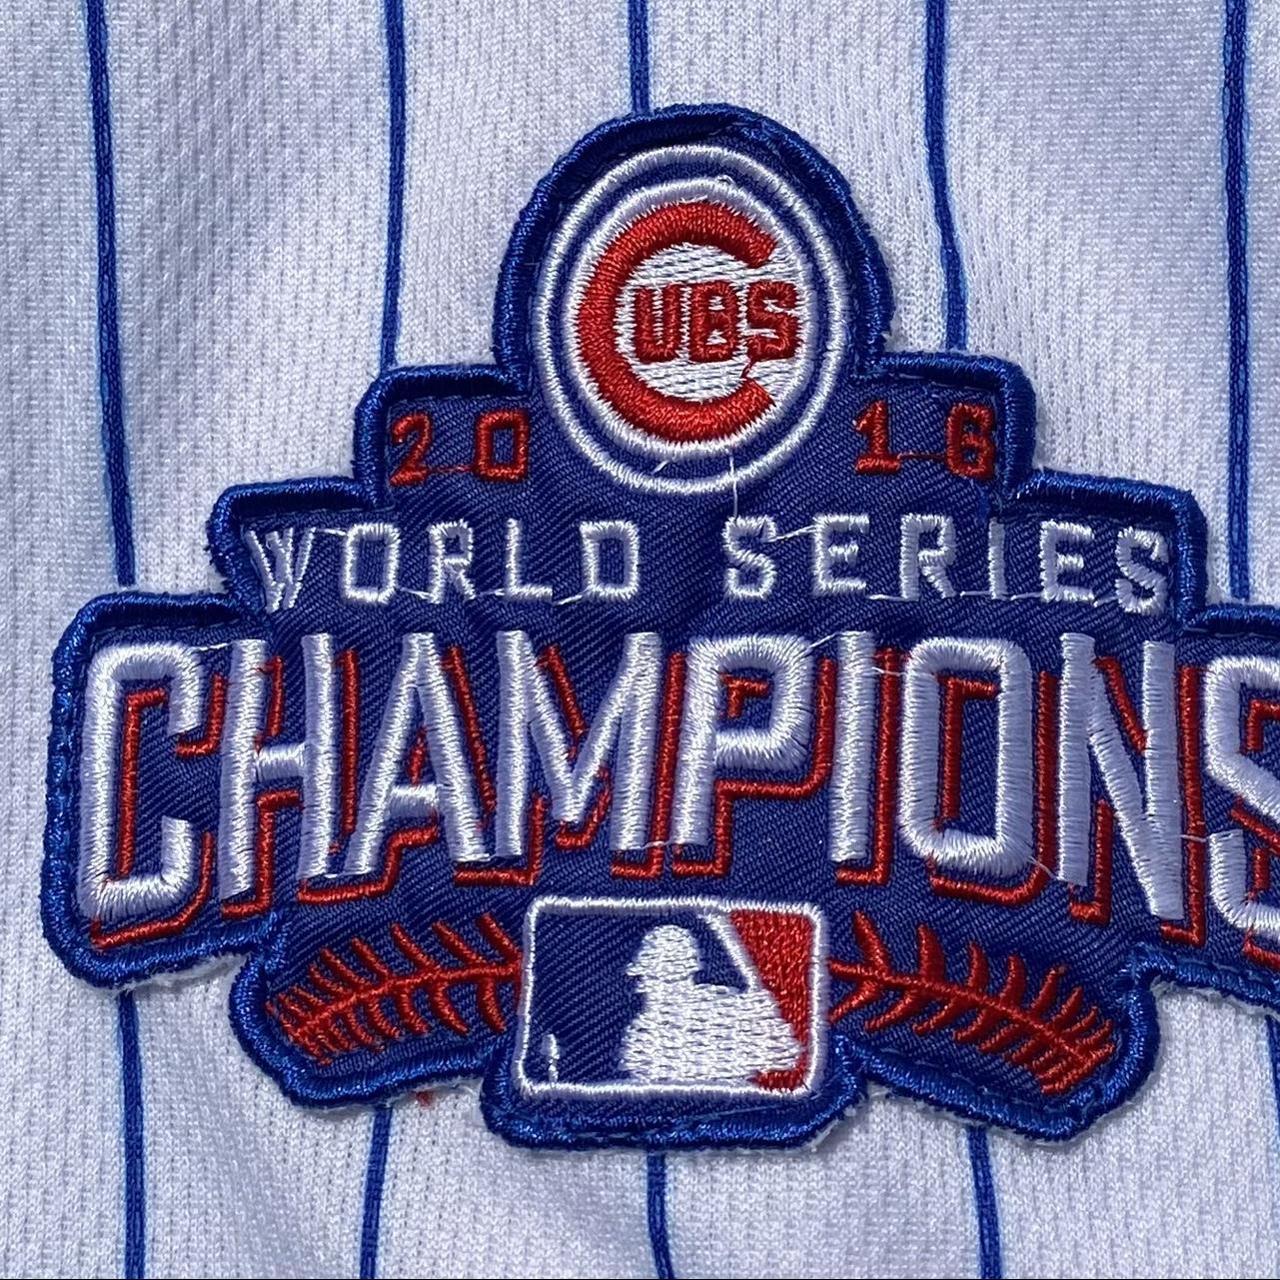 Anthony Rizzo cubs jersey 2016 World Series - Depop